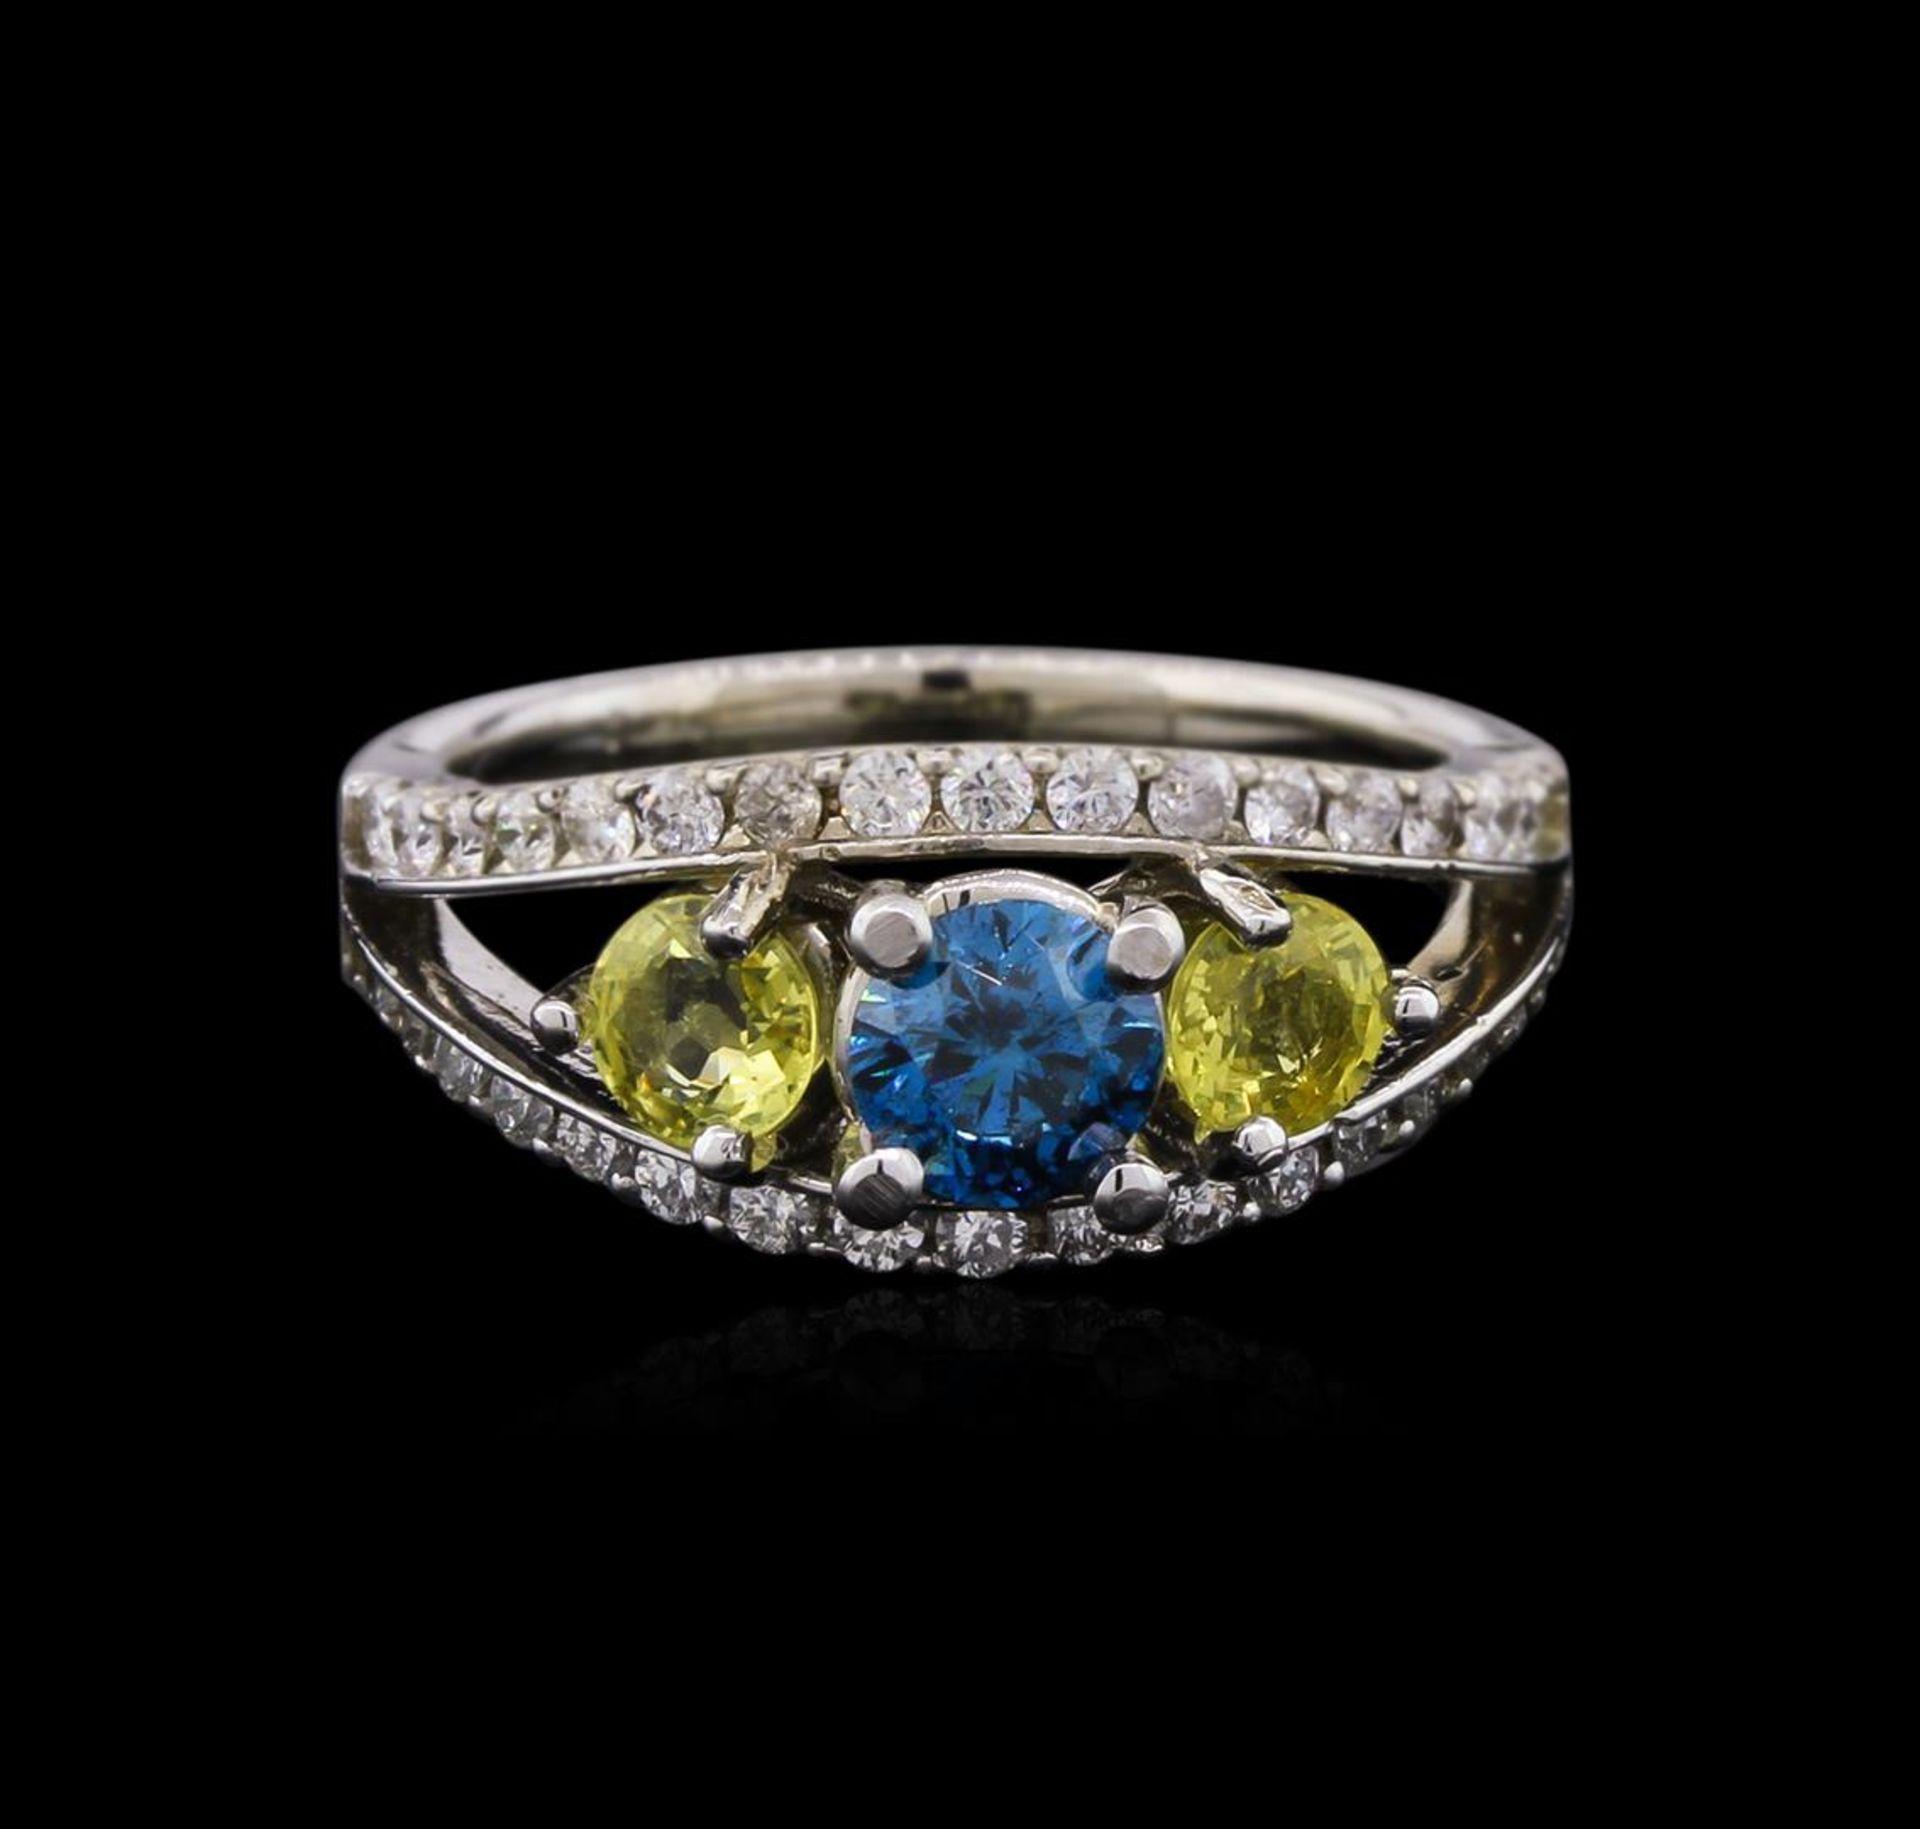 0.54 ctw Blue Diamond and Sapphire Ring - 14KT White Gold - Image 2 of 2